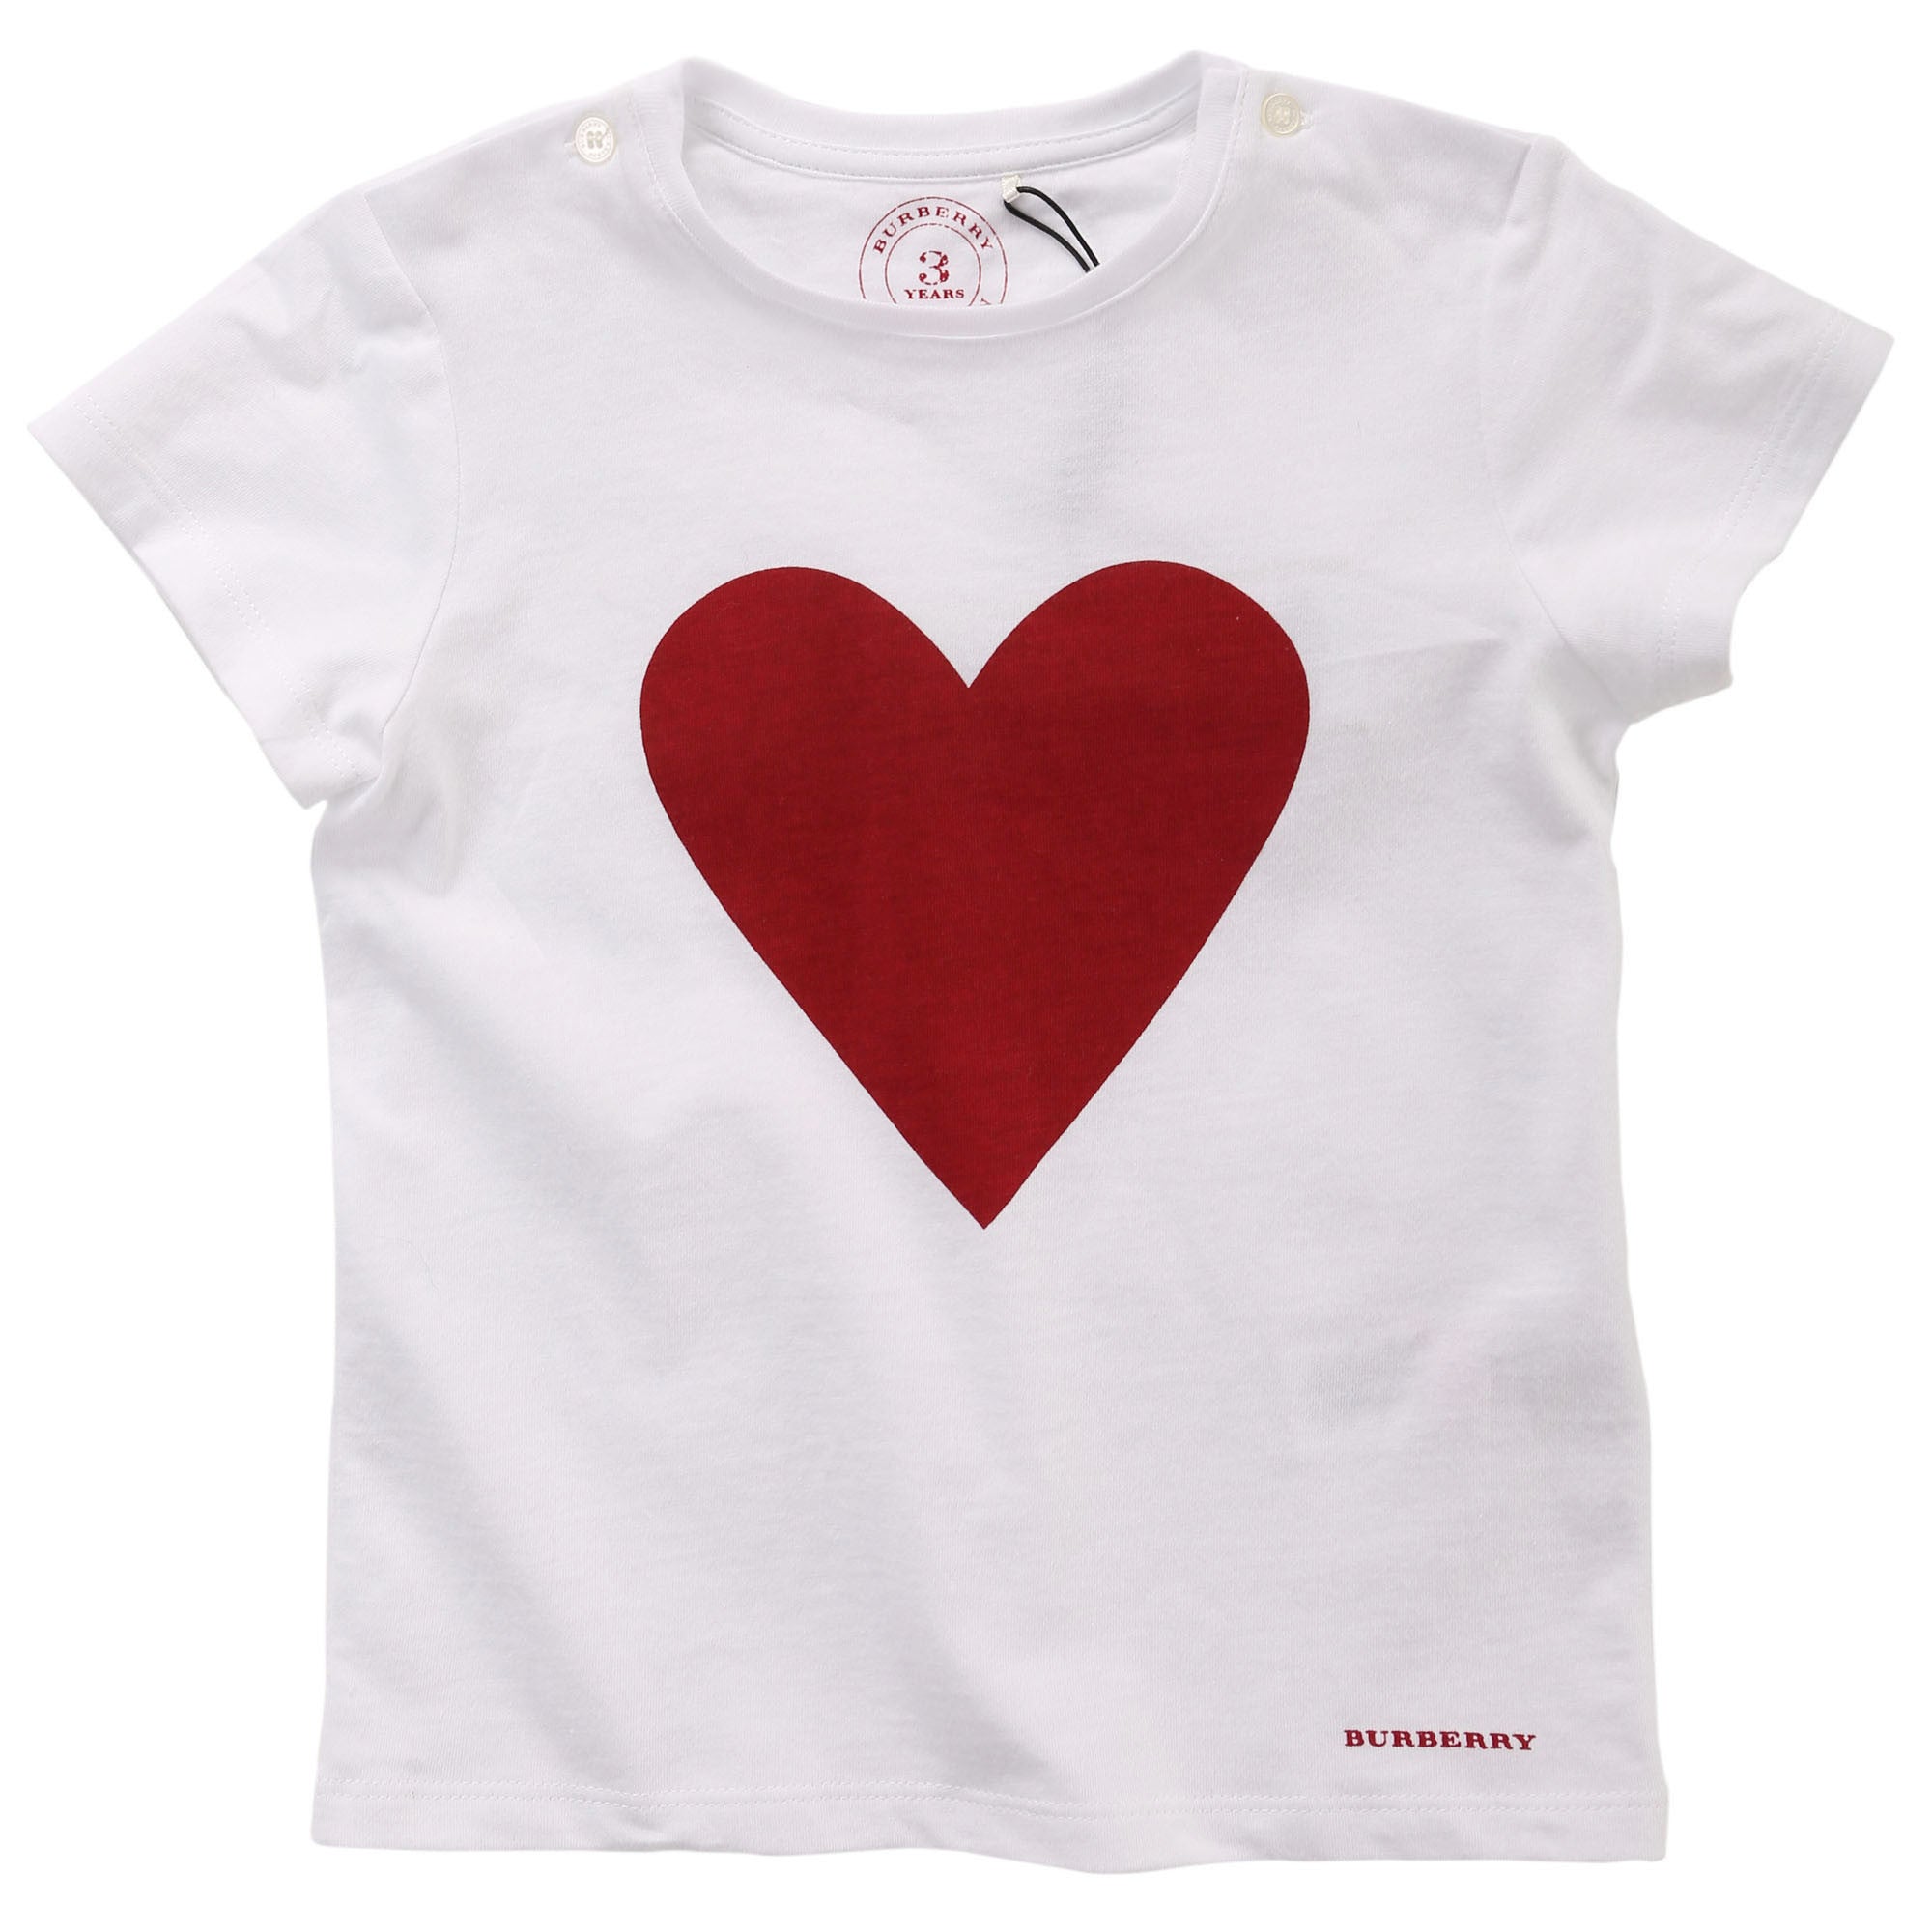 Baby Girls White Cotton T-Shirt With Red Heart Trims - CÉMAROSE | Children's Fashion Store - 1